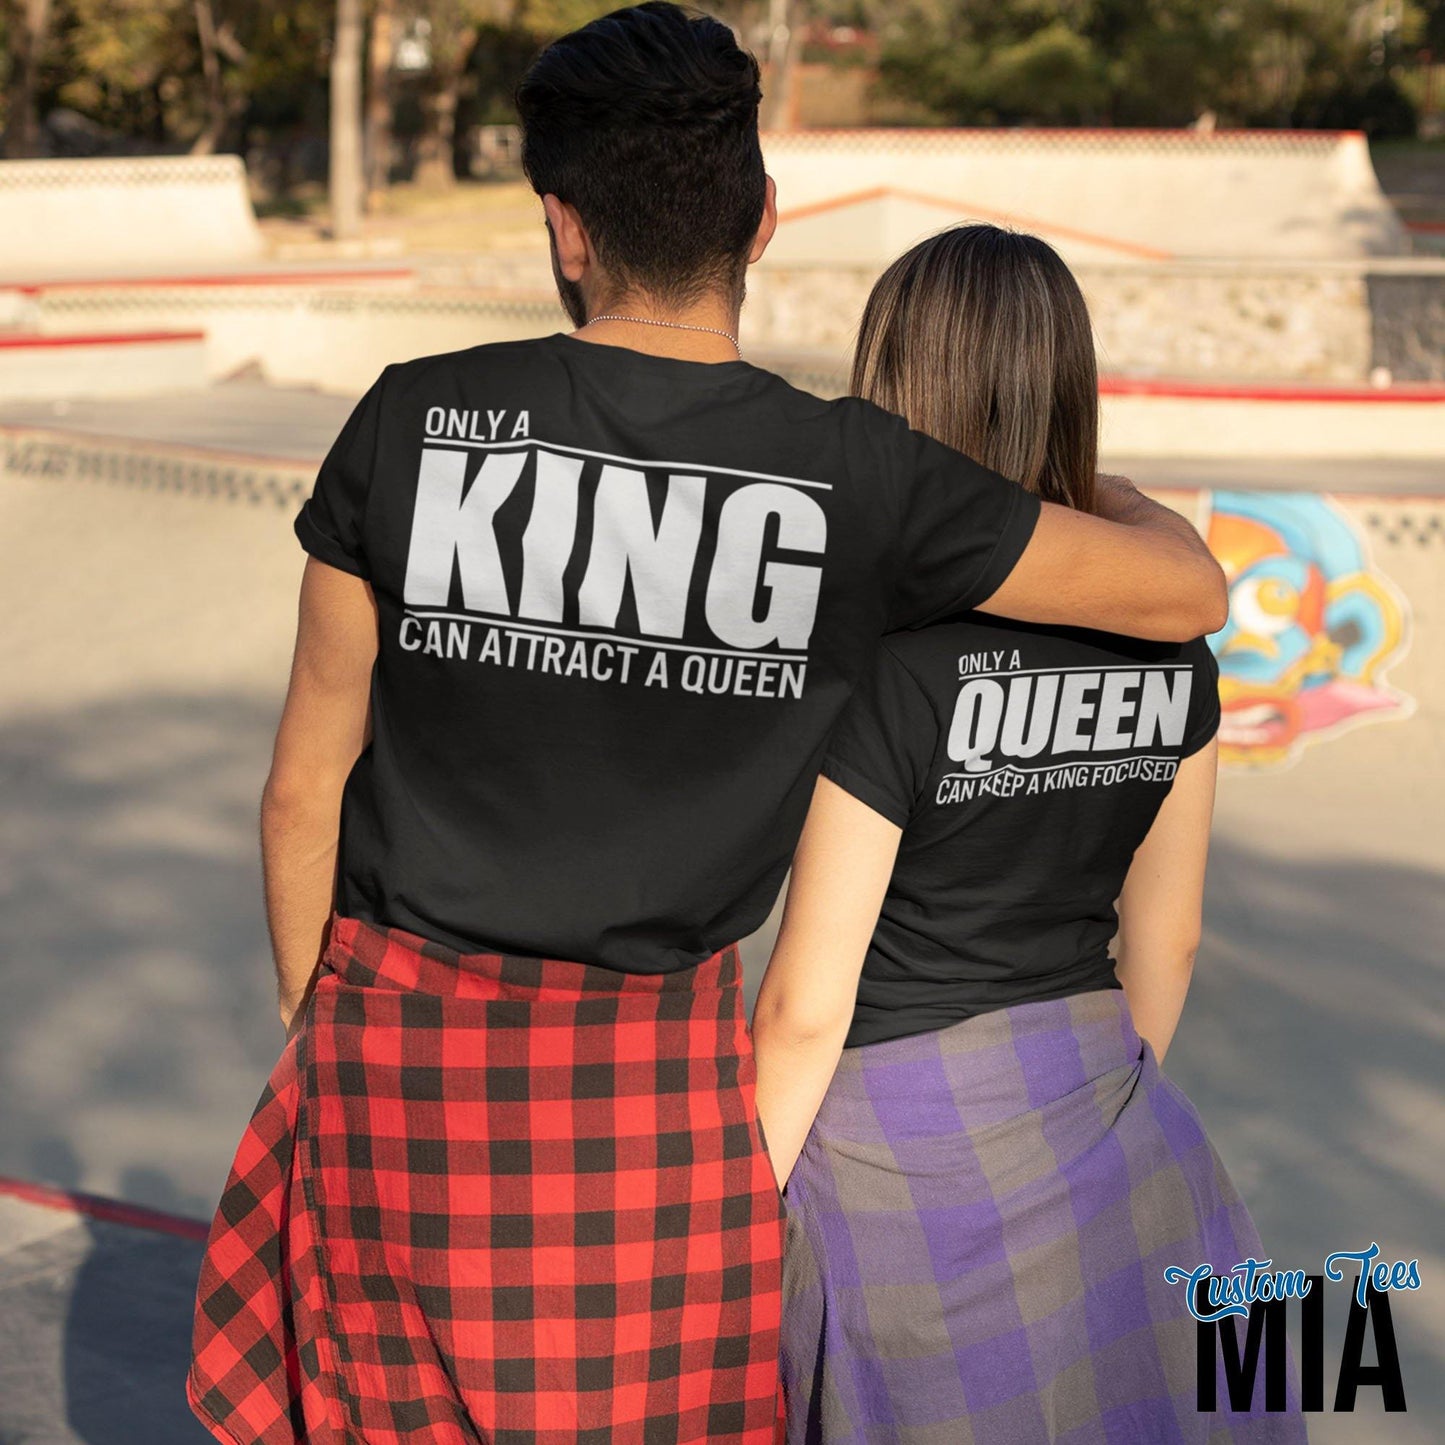 Only a King Can Attract a Queen, Only a Queen Can Keep a King Focused Couples Shirts - Custom Tees MIA